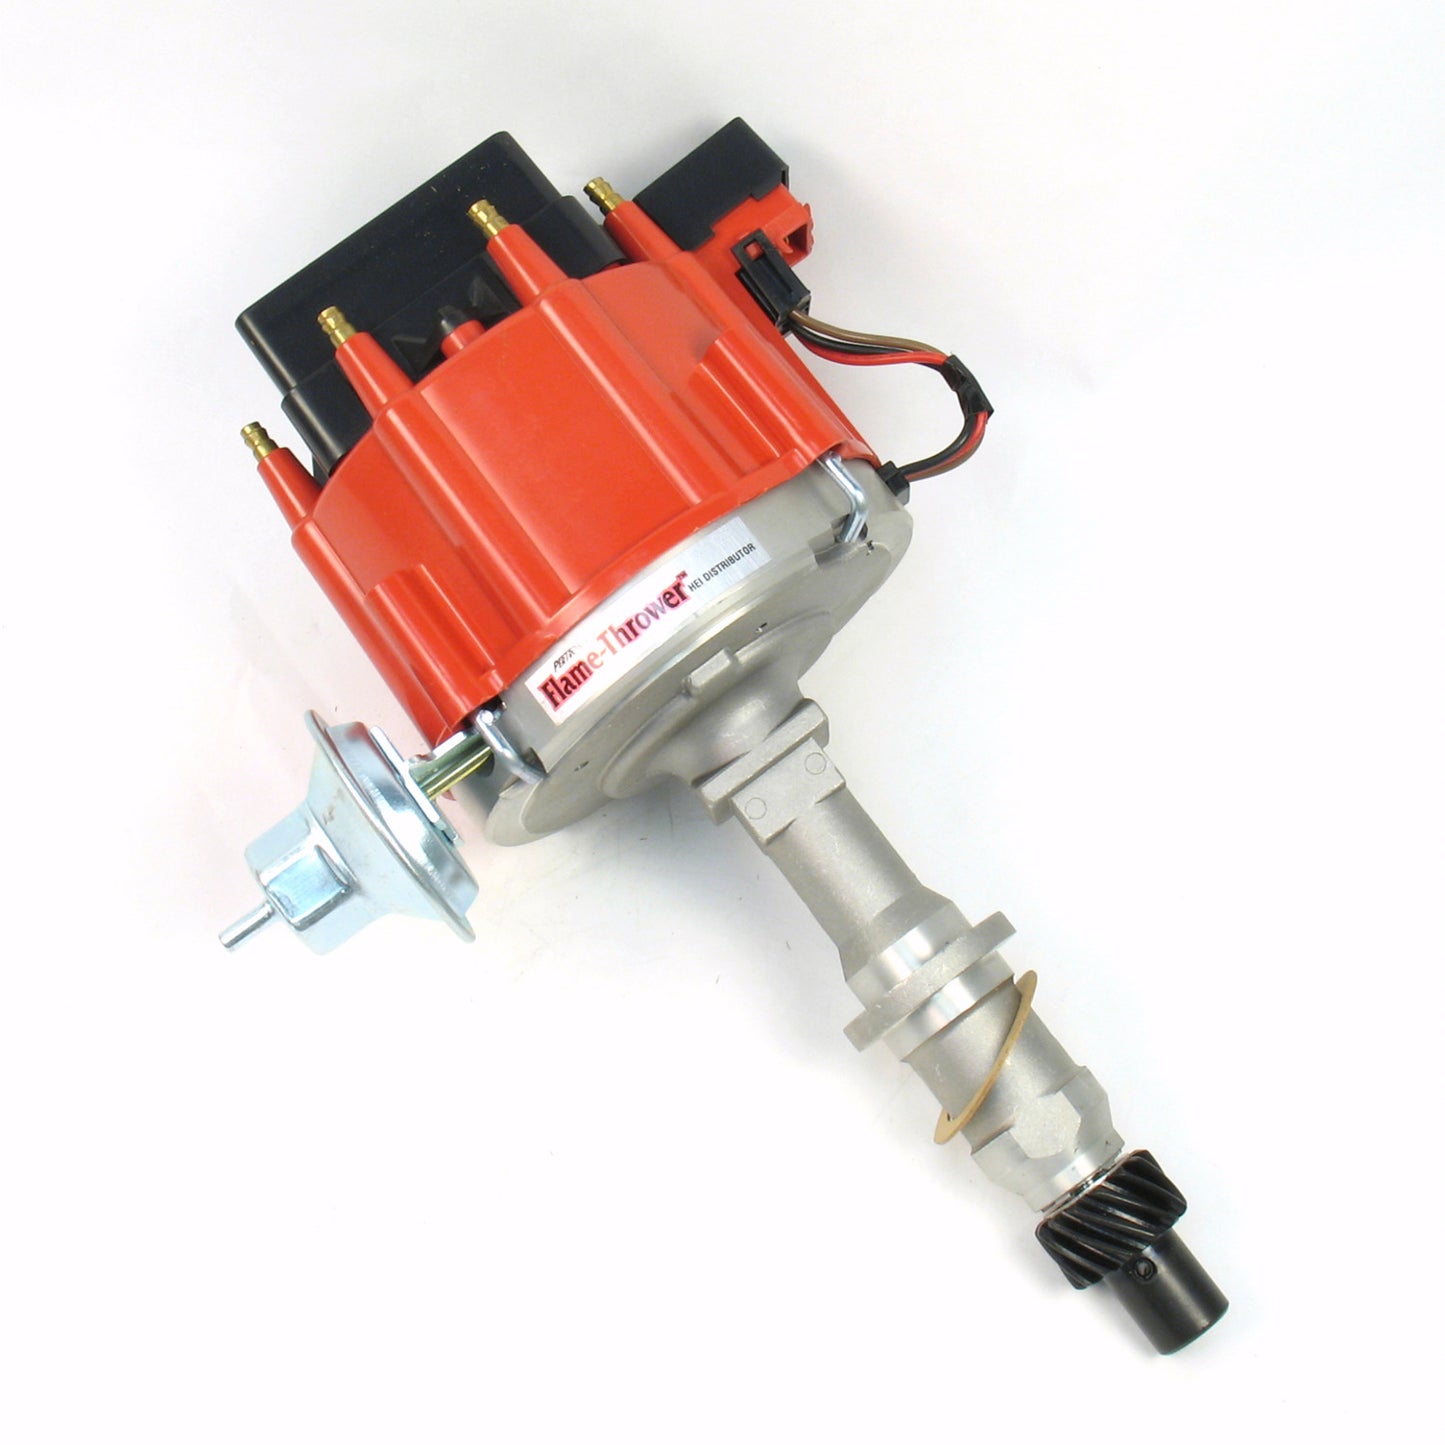 PerTronix D71201 Flame-Thrower Distributor HEI III Pontiac 301-455 Red Cap with multiple sparks and an adjustable digital rev limiter